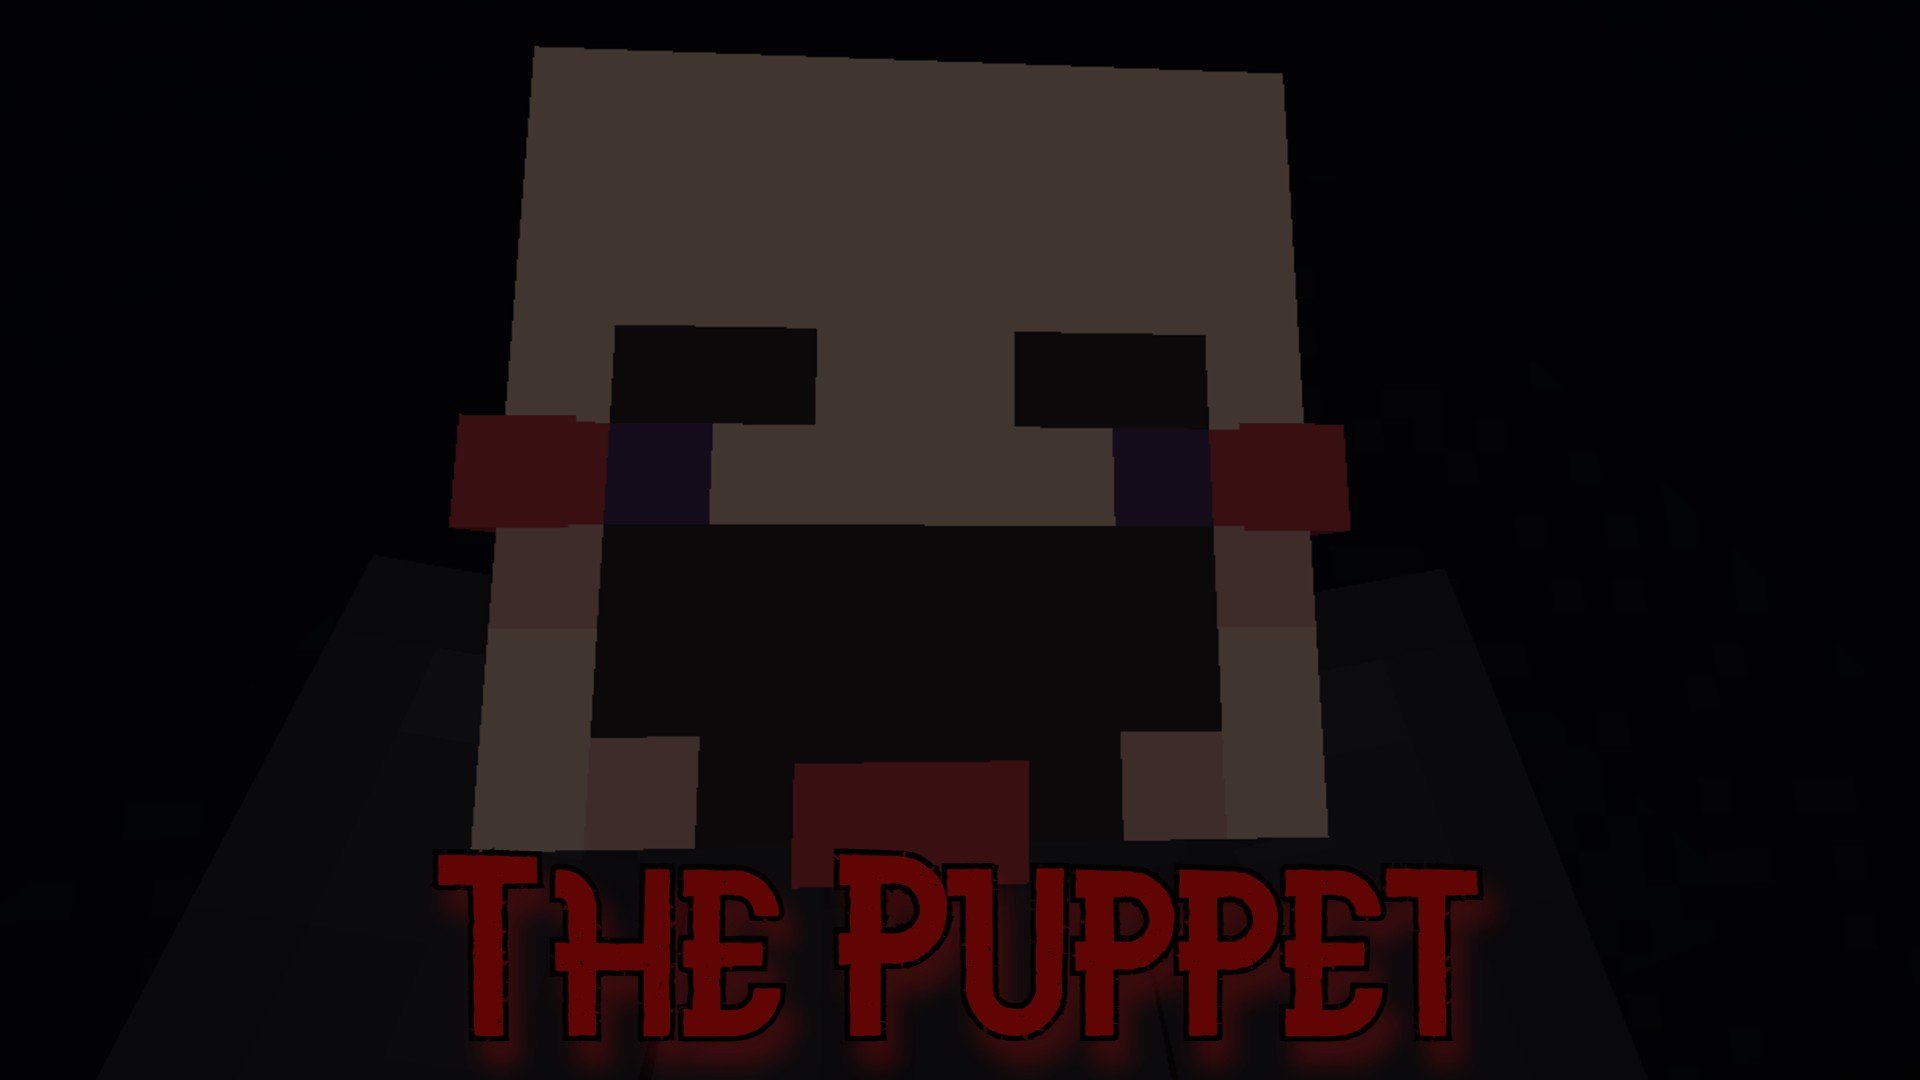 Download The Puppet for Minecraft 1.16.5